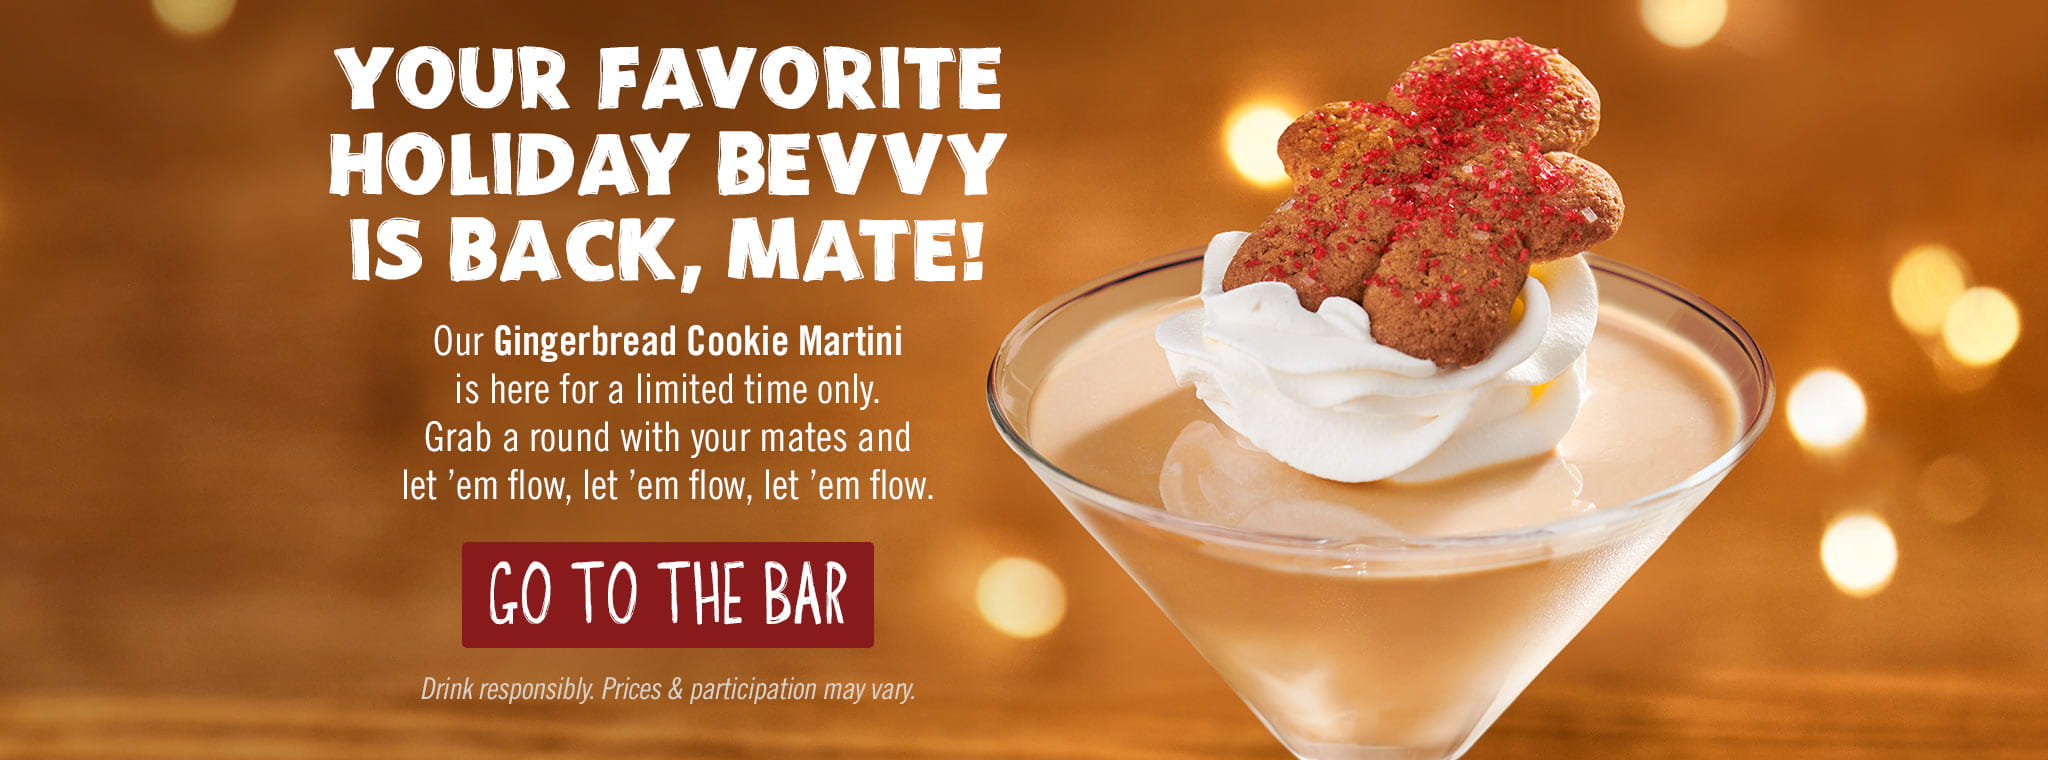 Your Favorite Holiday Bevvy Is Back, Mate! Our Gingerbread Cookie Martini is here for a limited time only. Grab a round with your mates and let 'em flow, let 'em flow, let 'em flow. GO TO THE BAR. Drink responsibly. Prices & participation may vary.